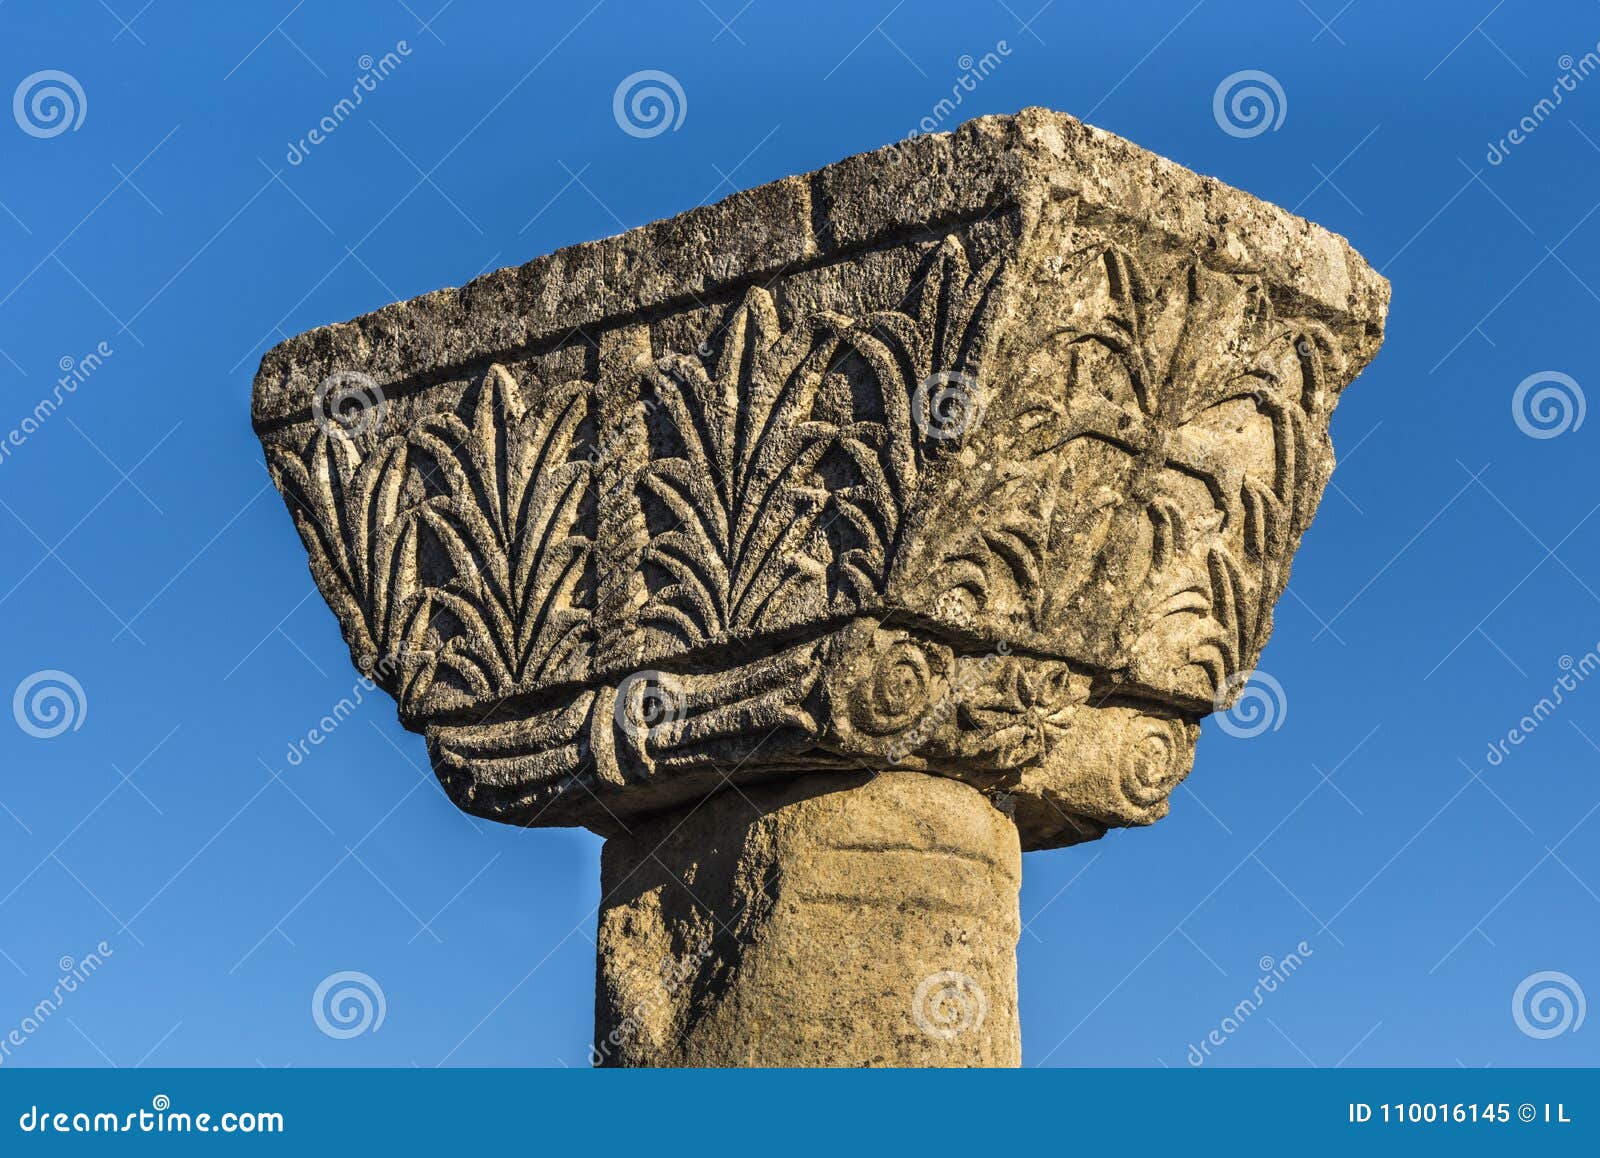 pillar detail of early christian cathedral complex in ruins of ancient byllis, illyria, albania